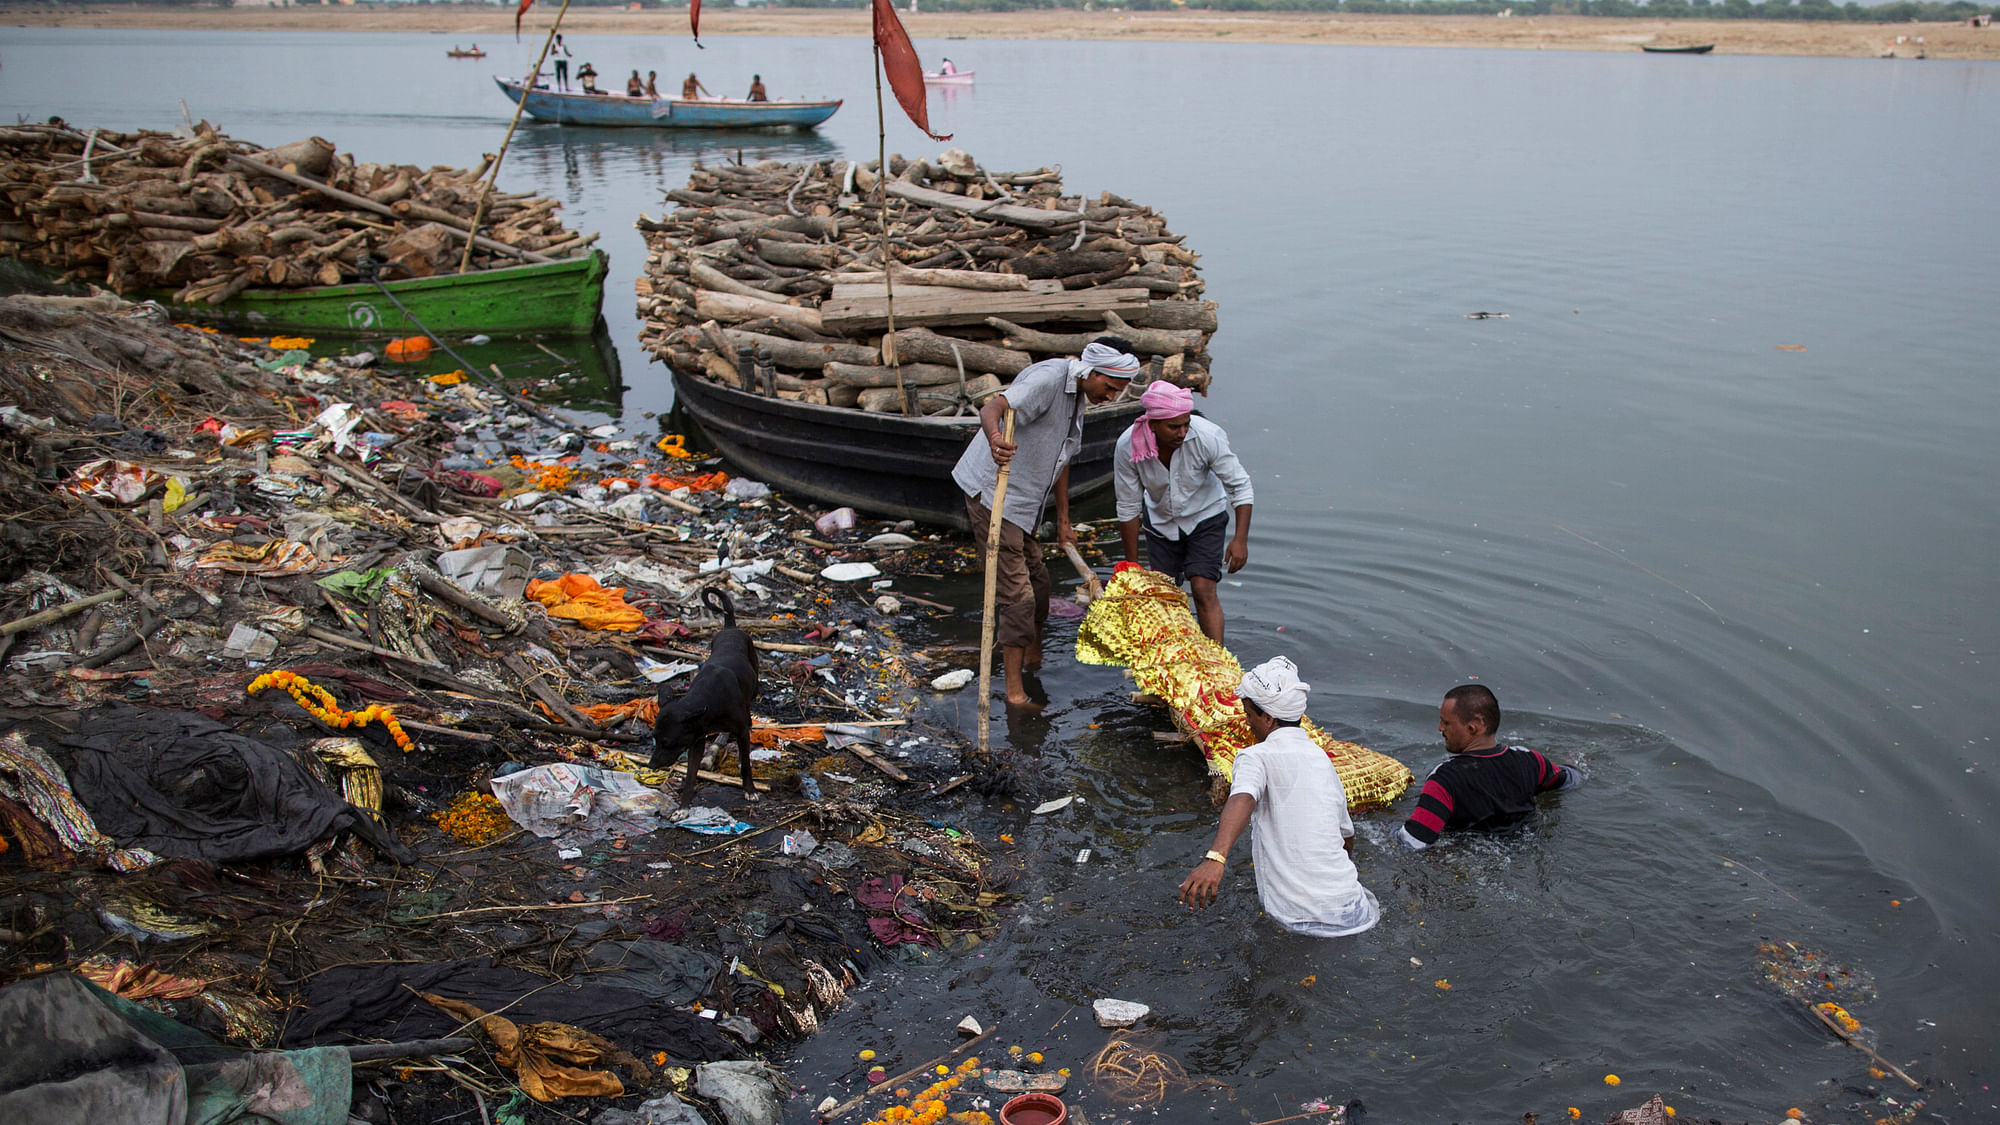 The polluted banks and waters of the river Ganga at Varanasi. Photo used for representational purpose. (Photo: Reuters)